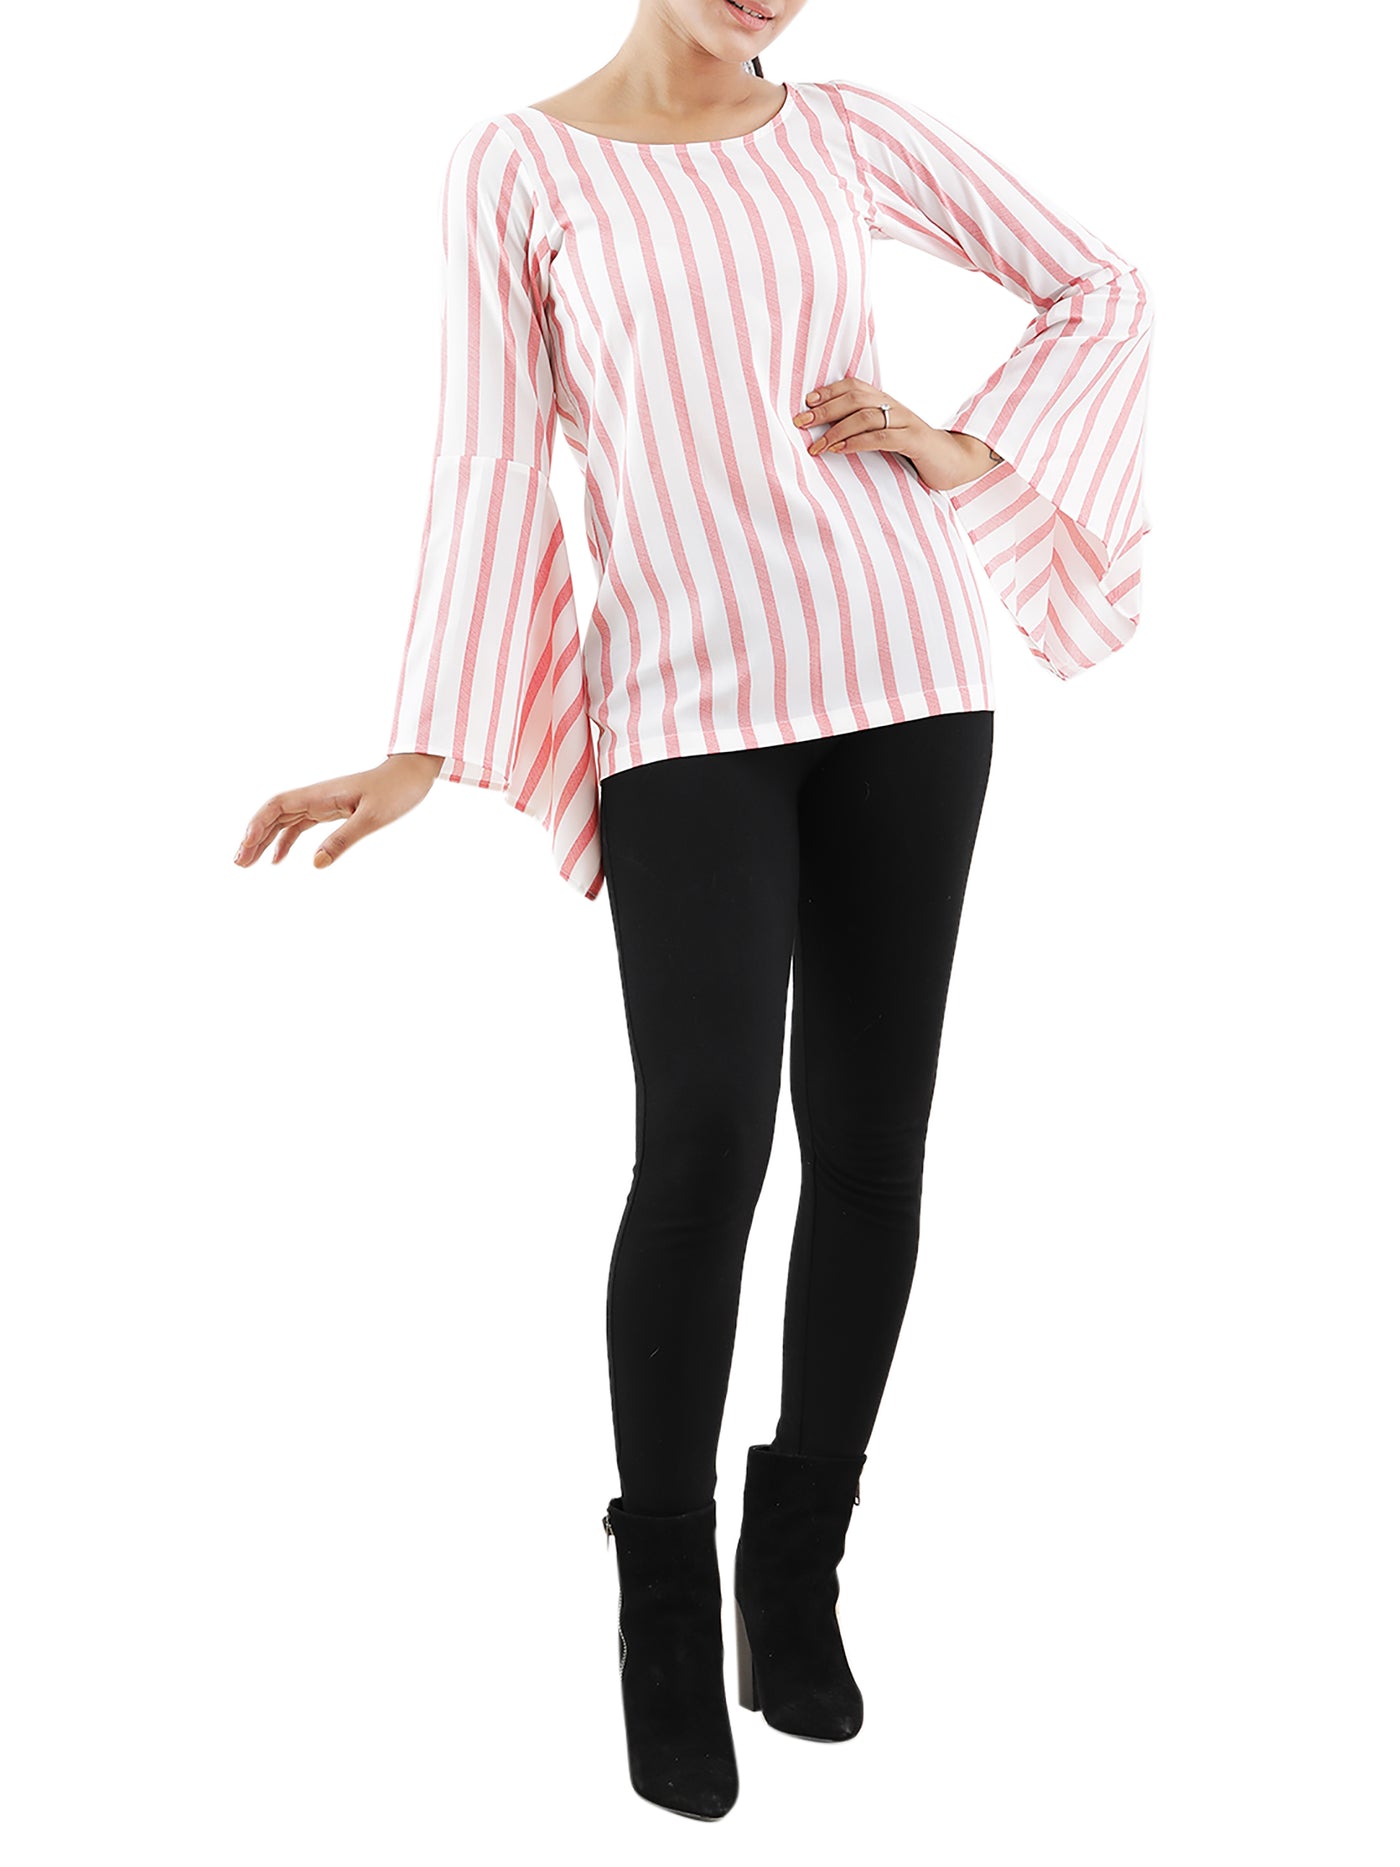 Belle Boat: Boat Neck Bell Sleeve Style Top